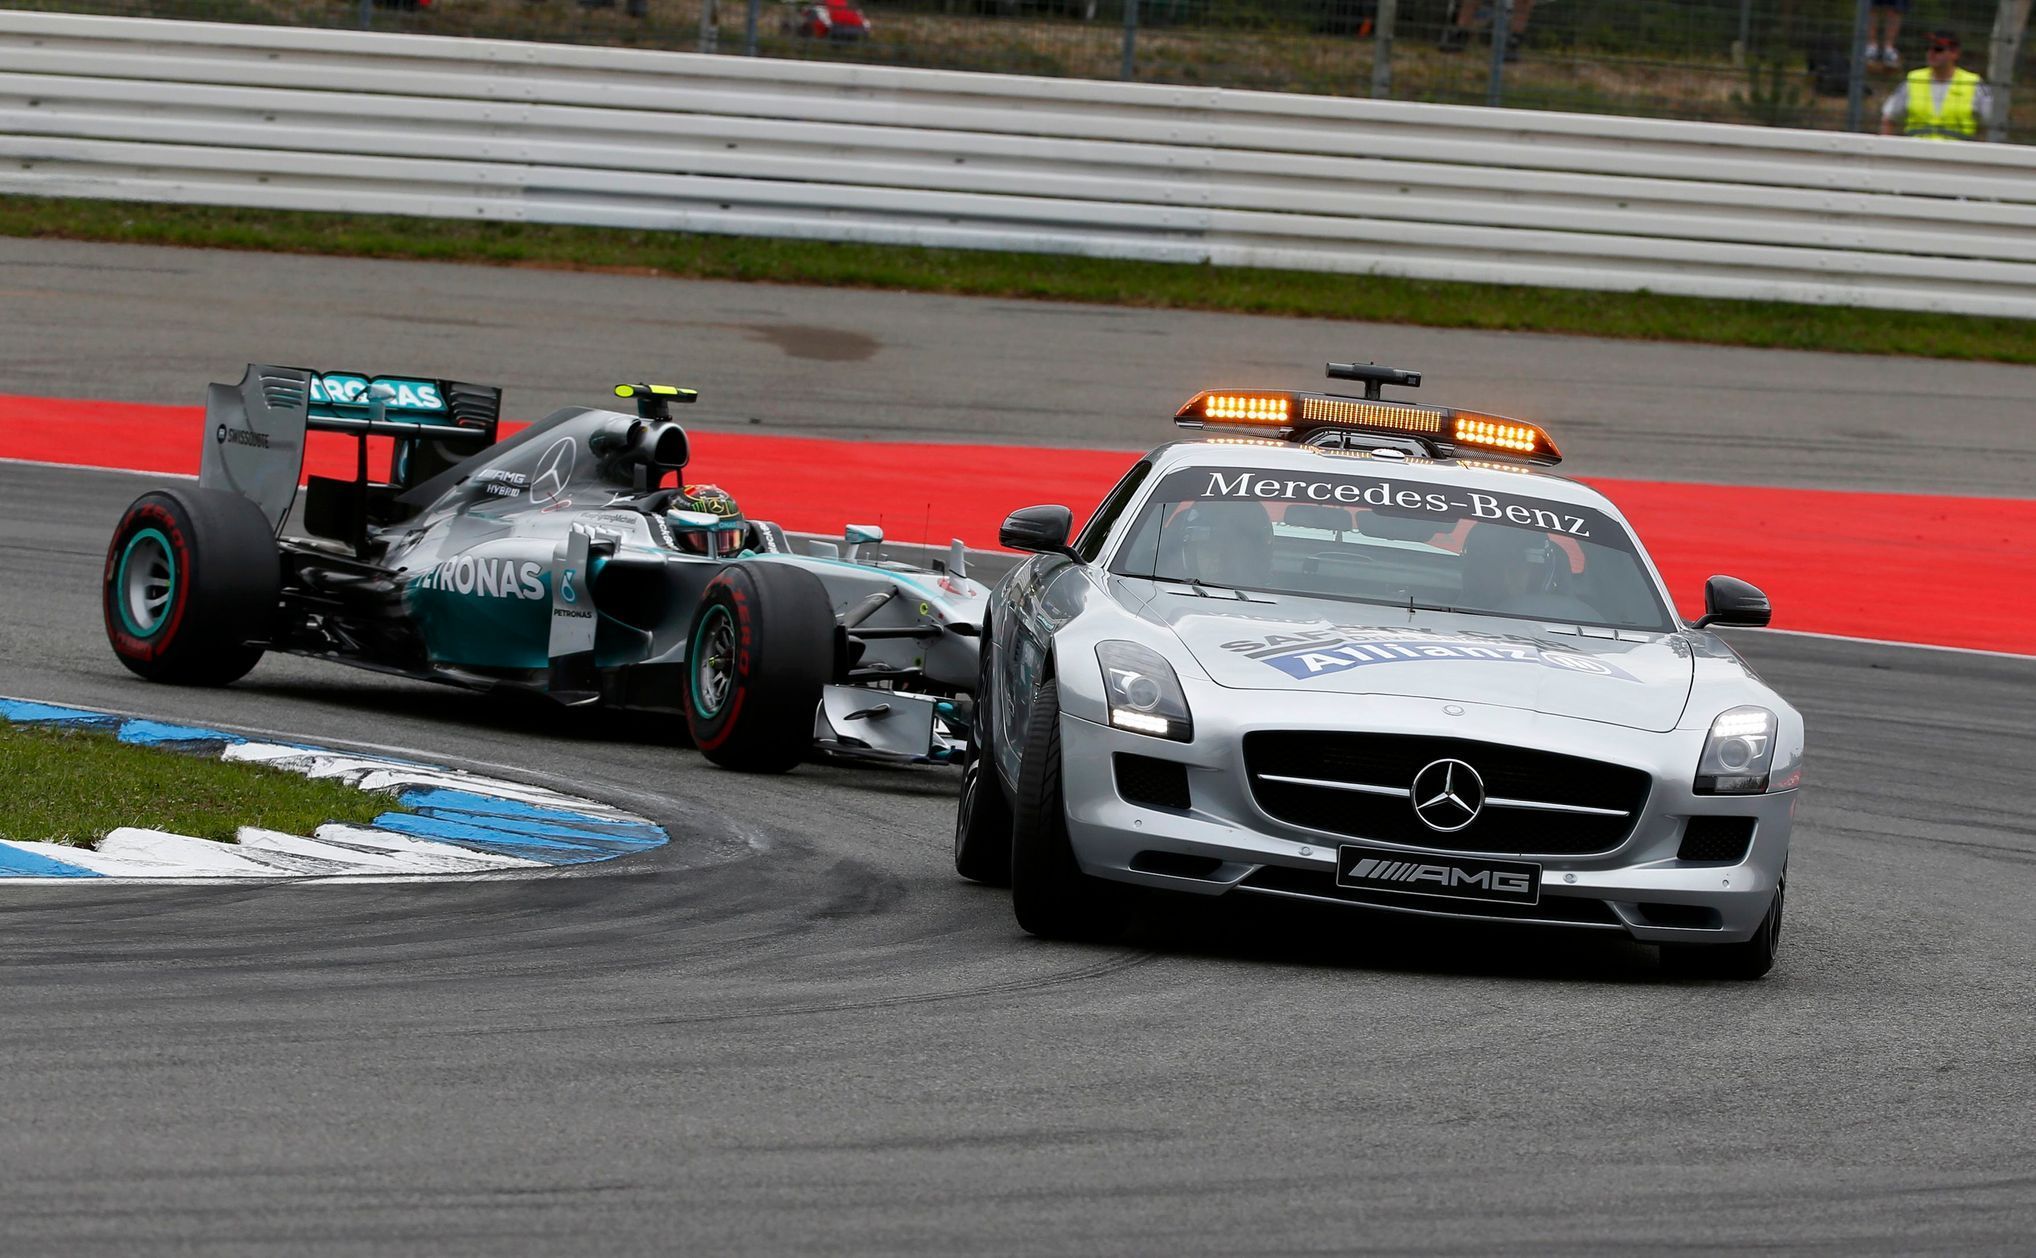 The safety car drives in front of Mercedes Formula One driver Nico Rosberg of Germany before German F1 Grand Prix at Hockenheim